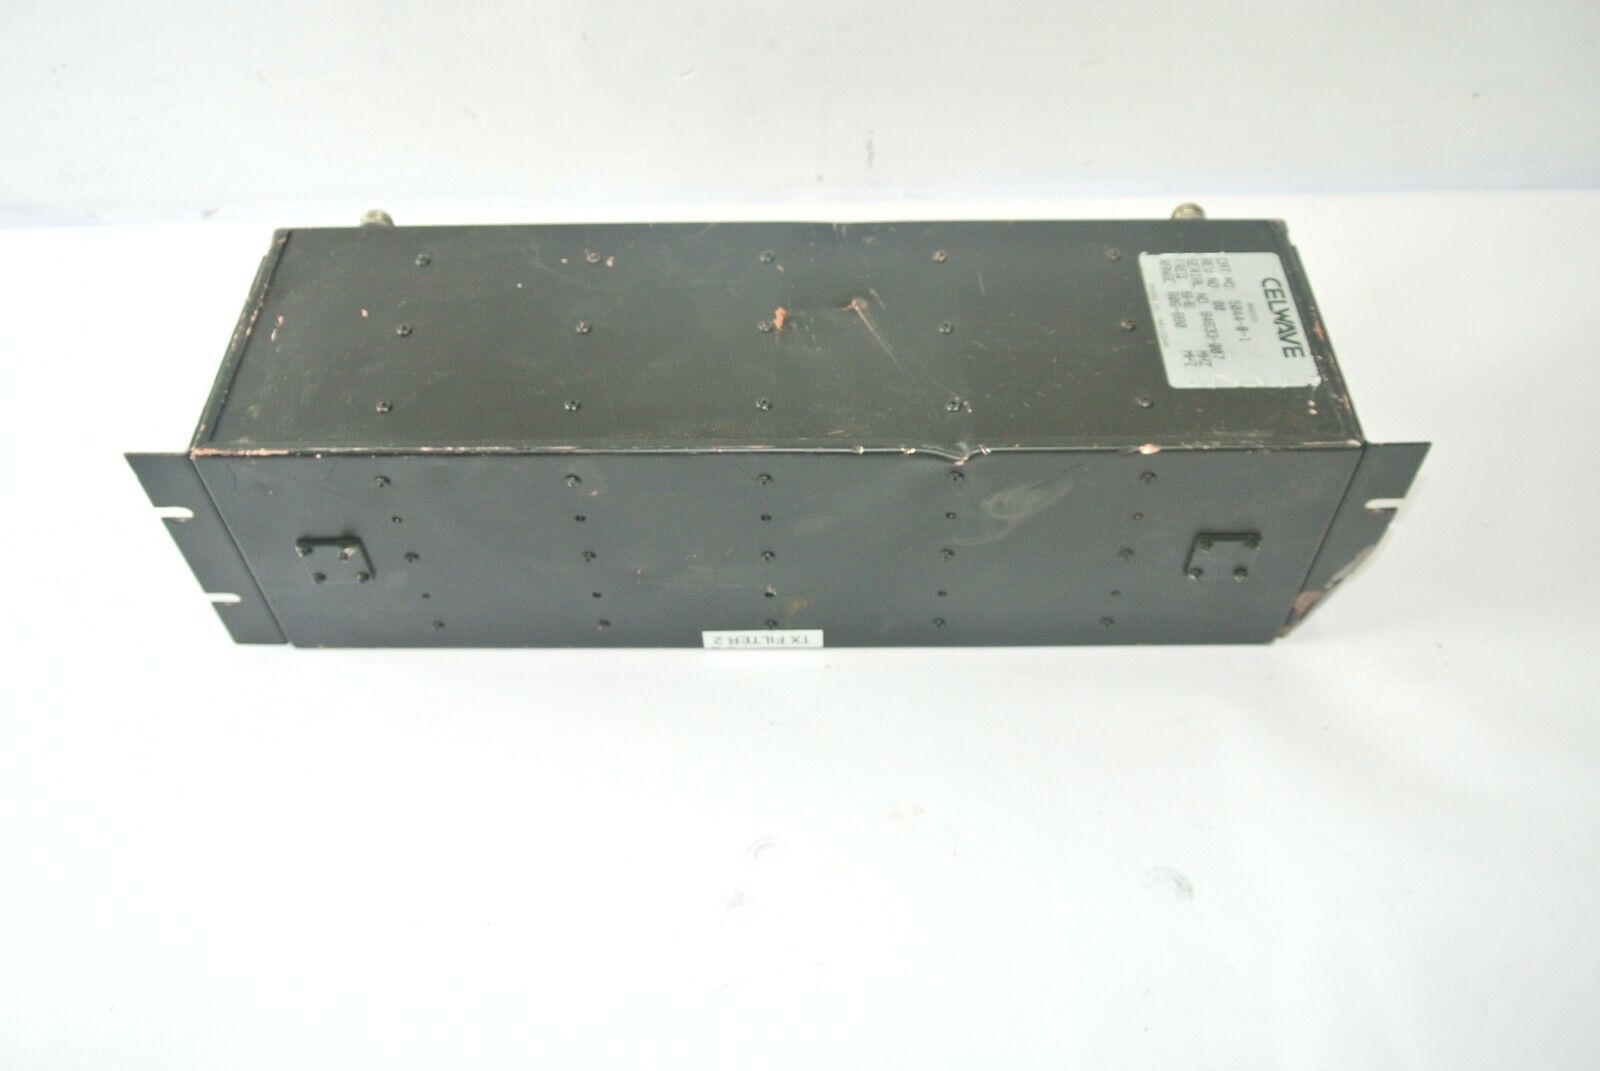 Celwave 5044-/-1 UHF Band Pass Filter Motorola Frequency 856-861 Range 806-880. Available Now for $100.00